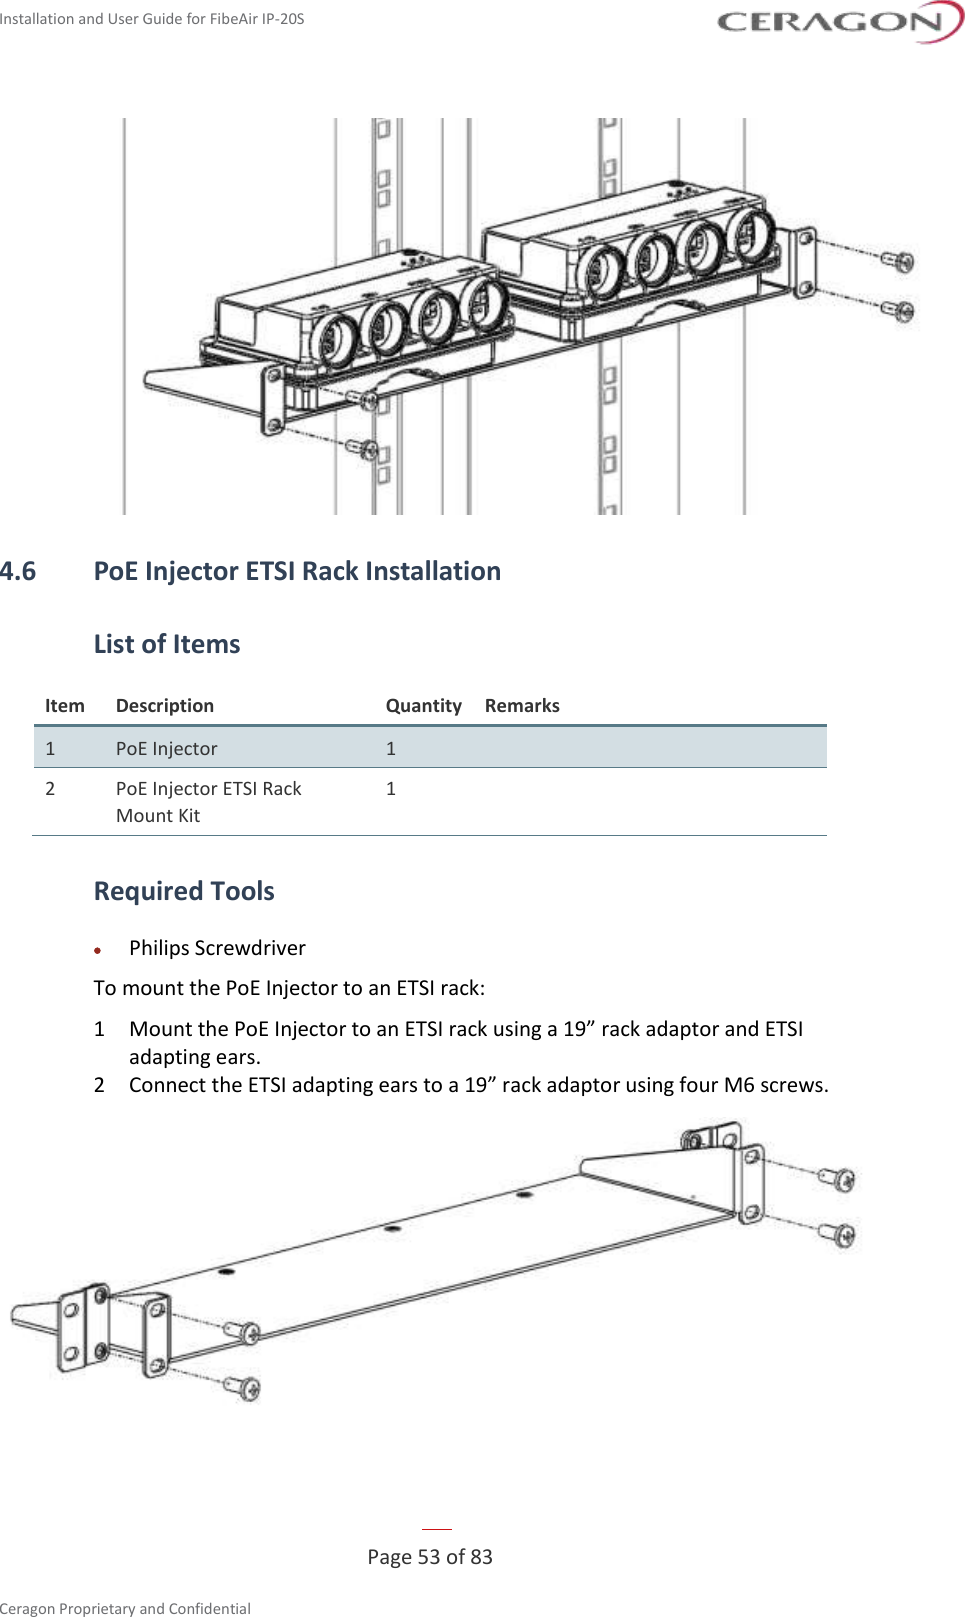 Installation and User Guide for FibeAir IP-20S   Page 53 of 83  Ceragon Proprietary and Confidential      4.6 PoE Injector ETSI Rack Installation List of Items Item Description Quantity Remarks 1 PoE Injector 1  2 PoE Injector ETSI Rack Mount Kit 1  Required Tools • Philips Screwdriver To mount the PoE Injector to an ETSI rack: 1  Mount the PoE Injector to an ETSI rack using a 19” rack adaptor and ETSI adapting ears.  2  Connect the ETSI adapting ears to a 19” rack adaptor using four M6 screws.  